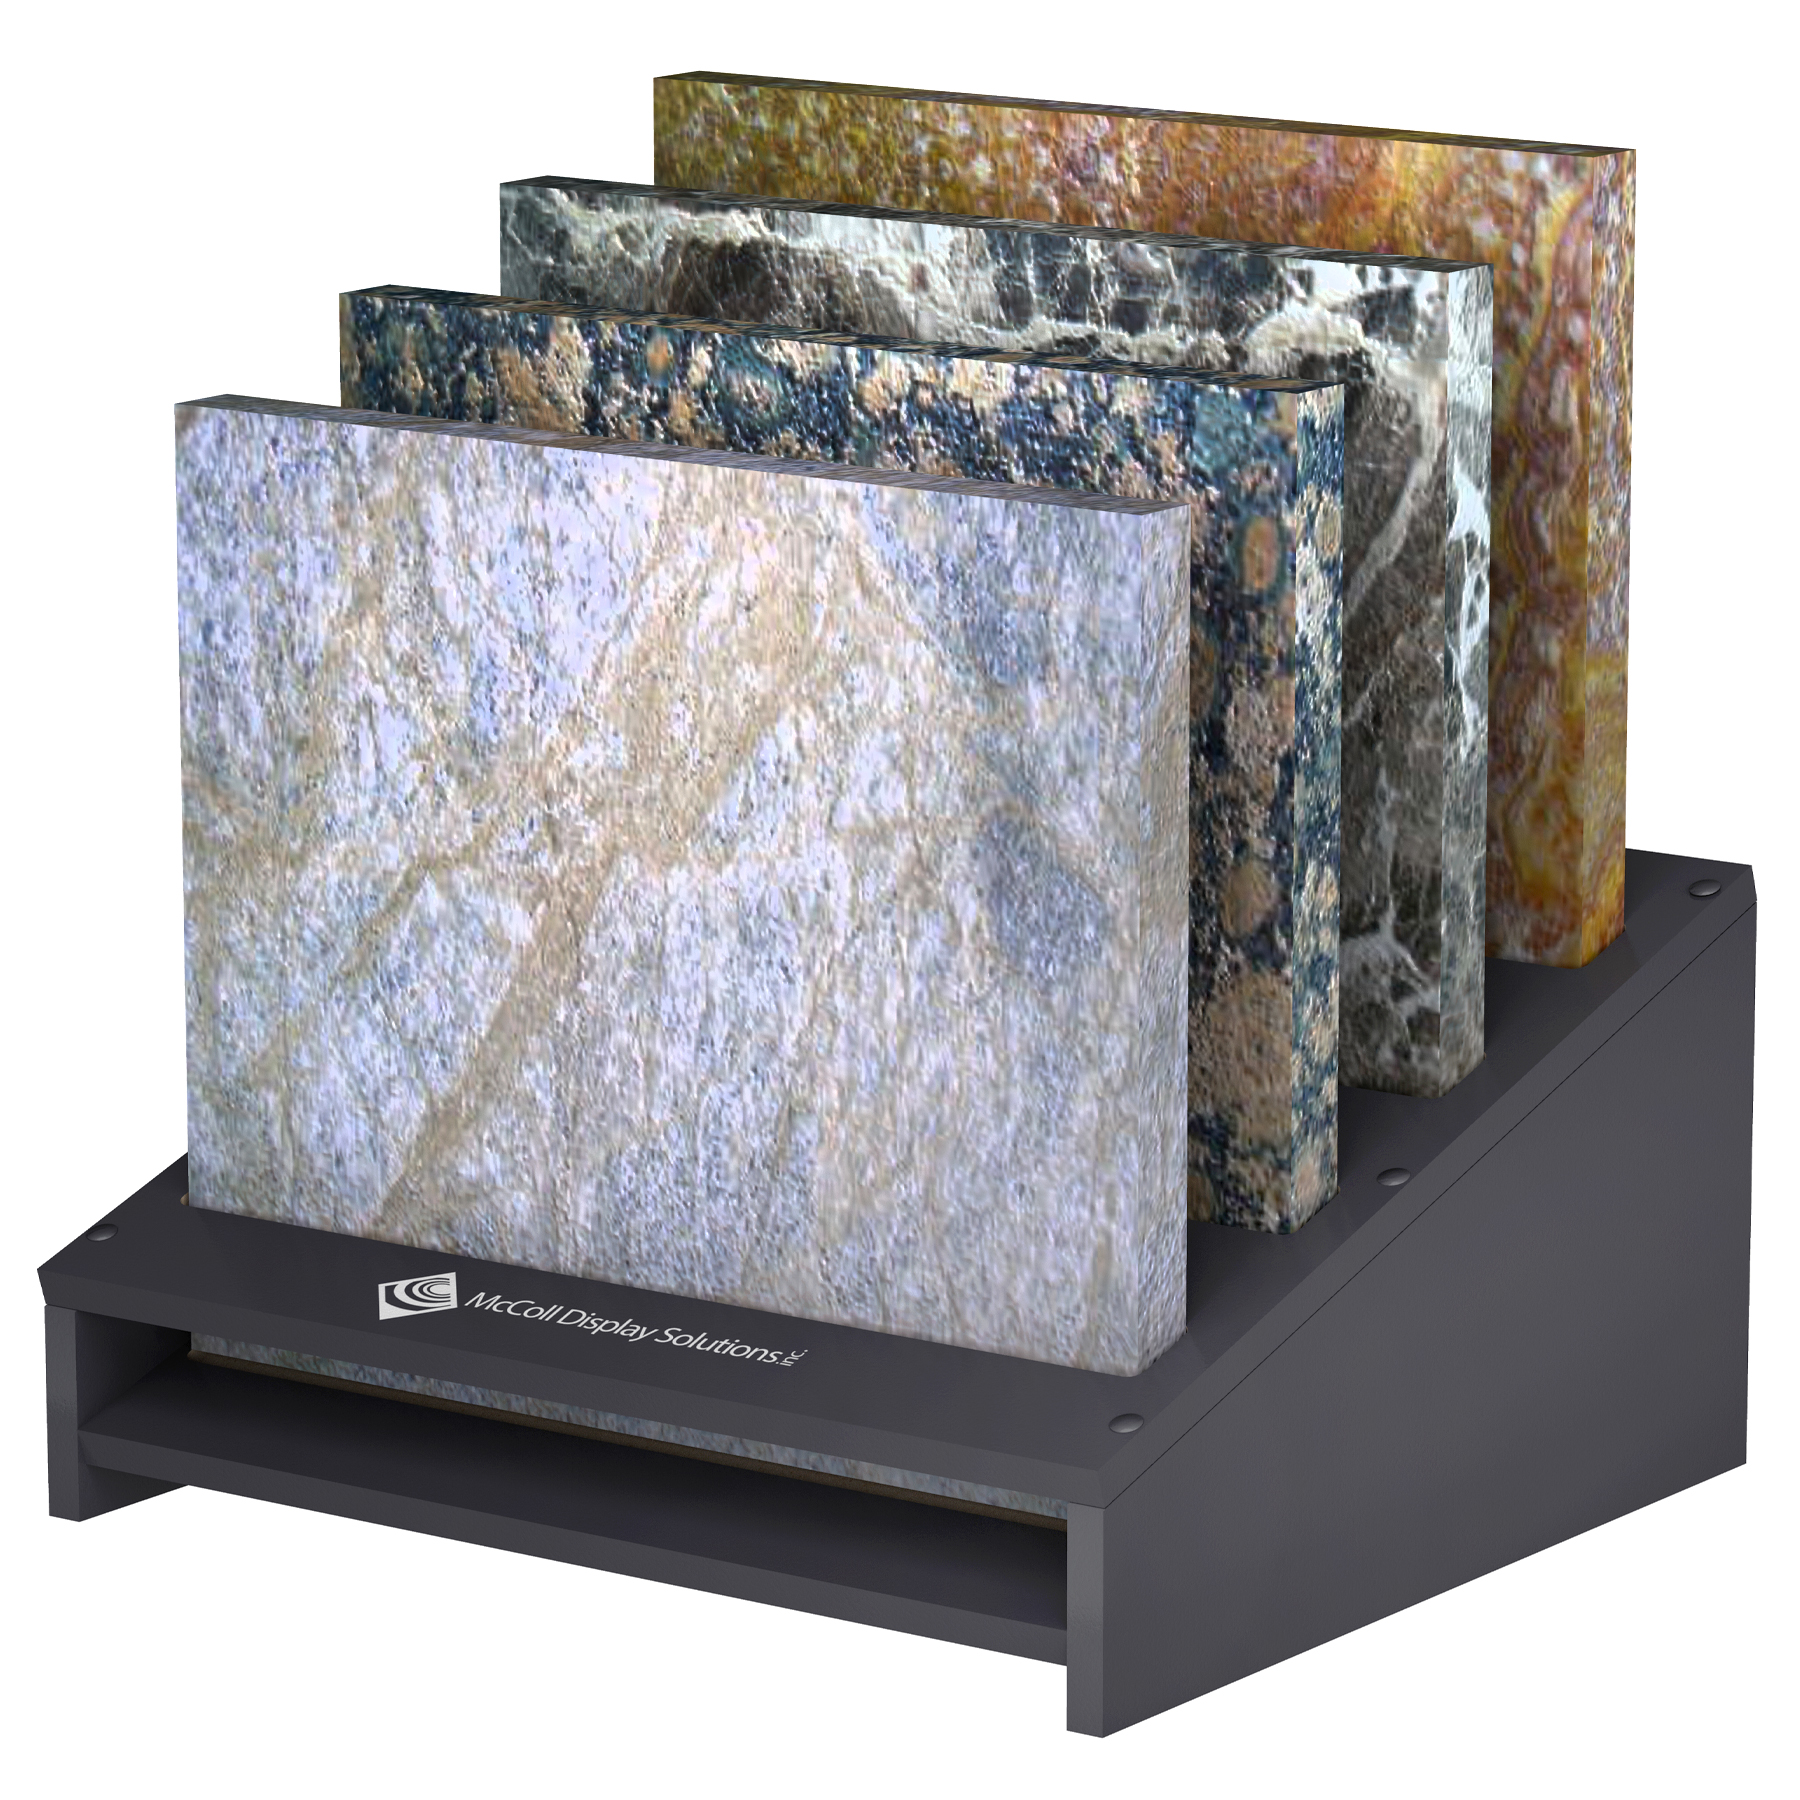 The Sturdy Wood Construction of the CD26 Slotted Waterfall Style Display Can Hold Thick Marble Granite and Quartz Countertop Samples